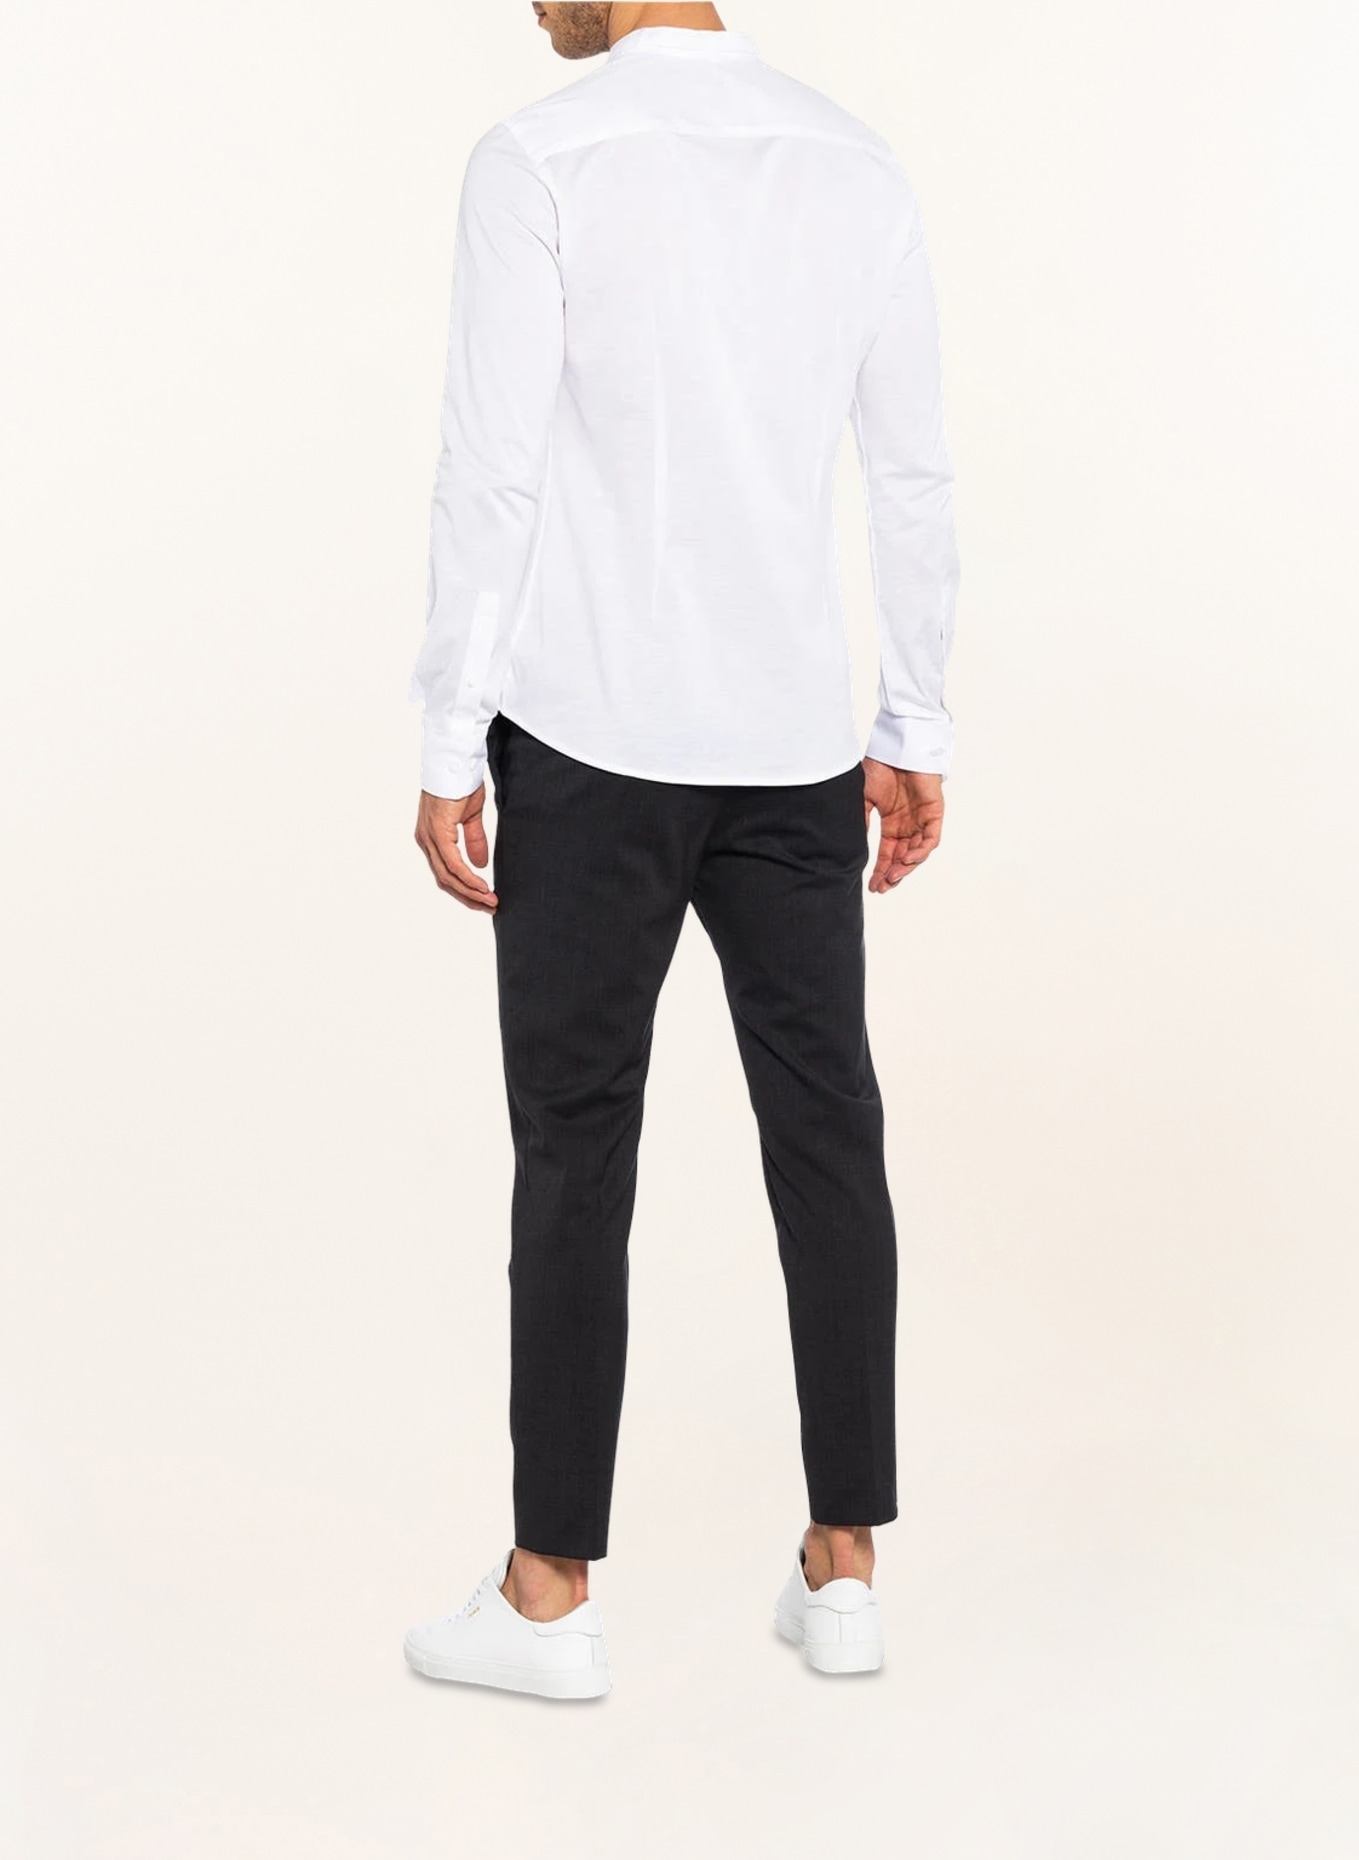 Gottseidank Trachten shirt LENZ extra slim fit with stand-up collar, Color: WHITE (Image 3)